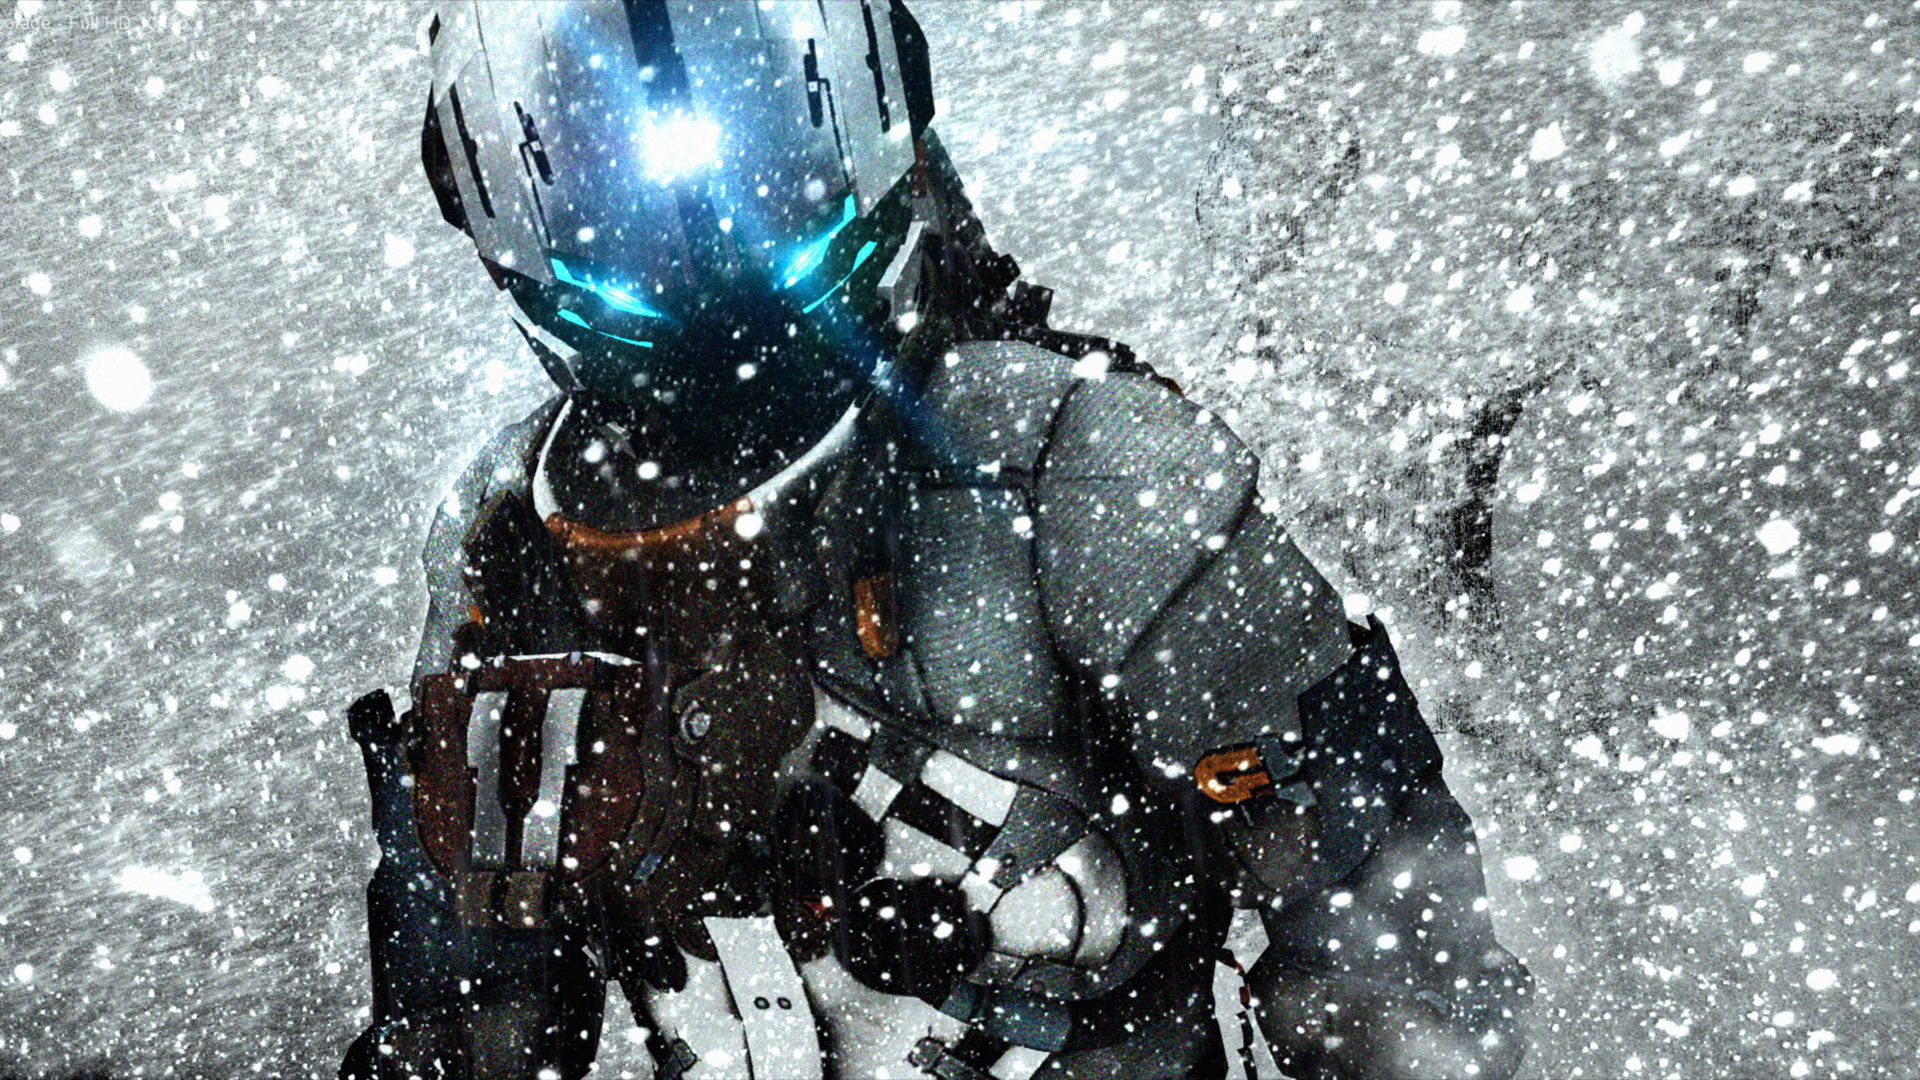 dead space 3 download free